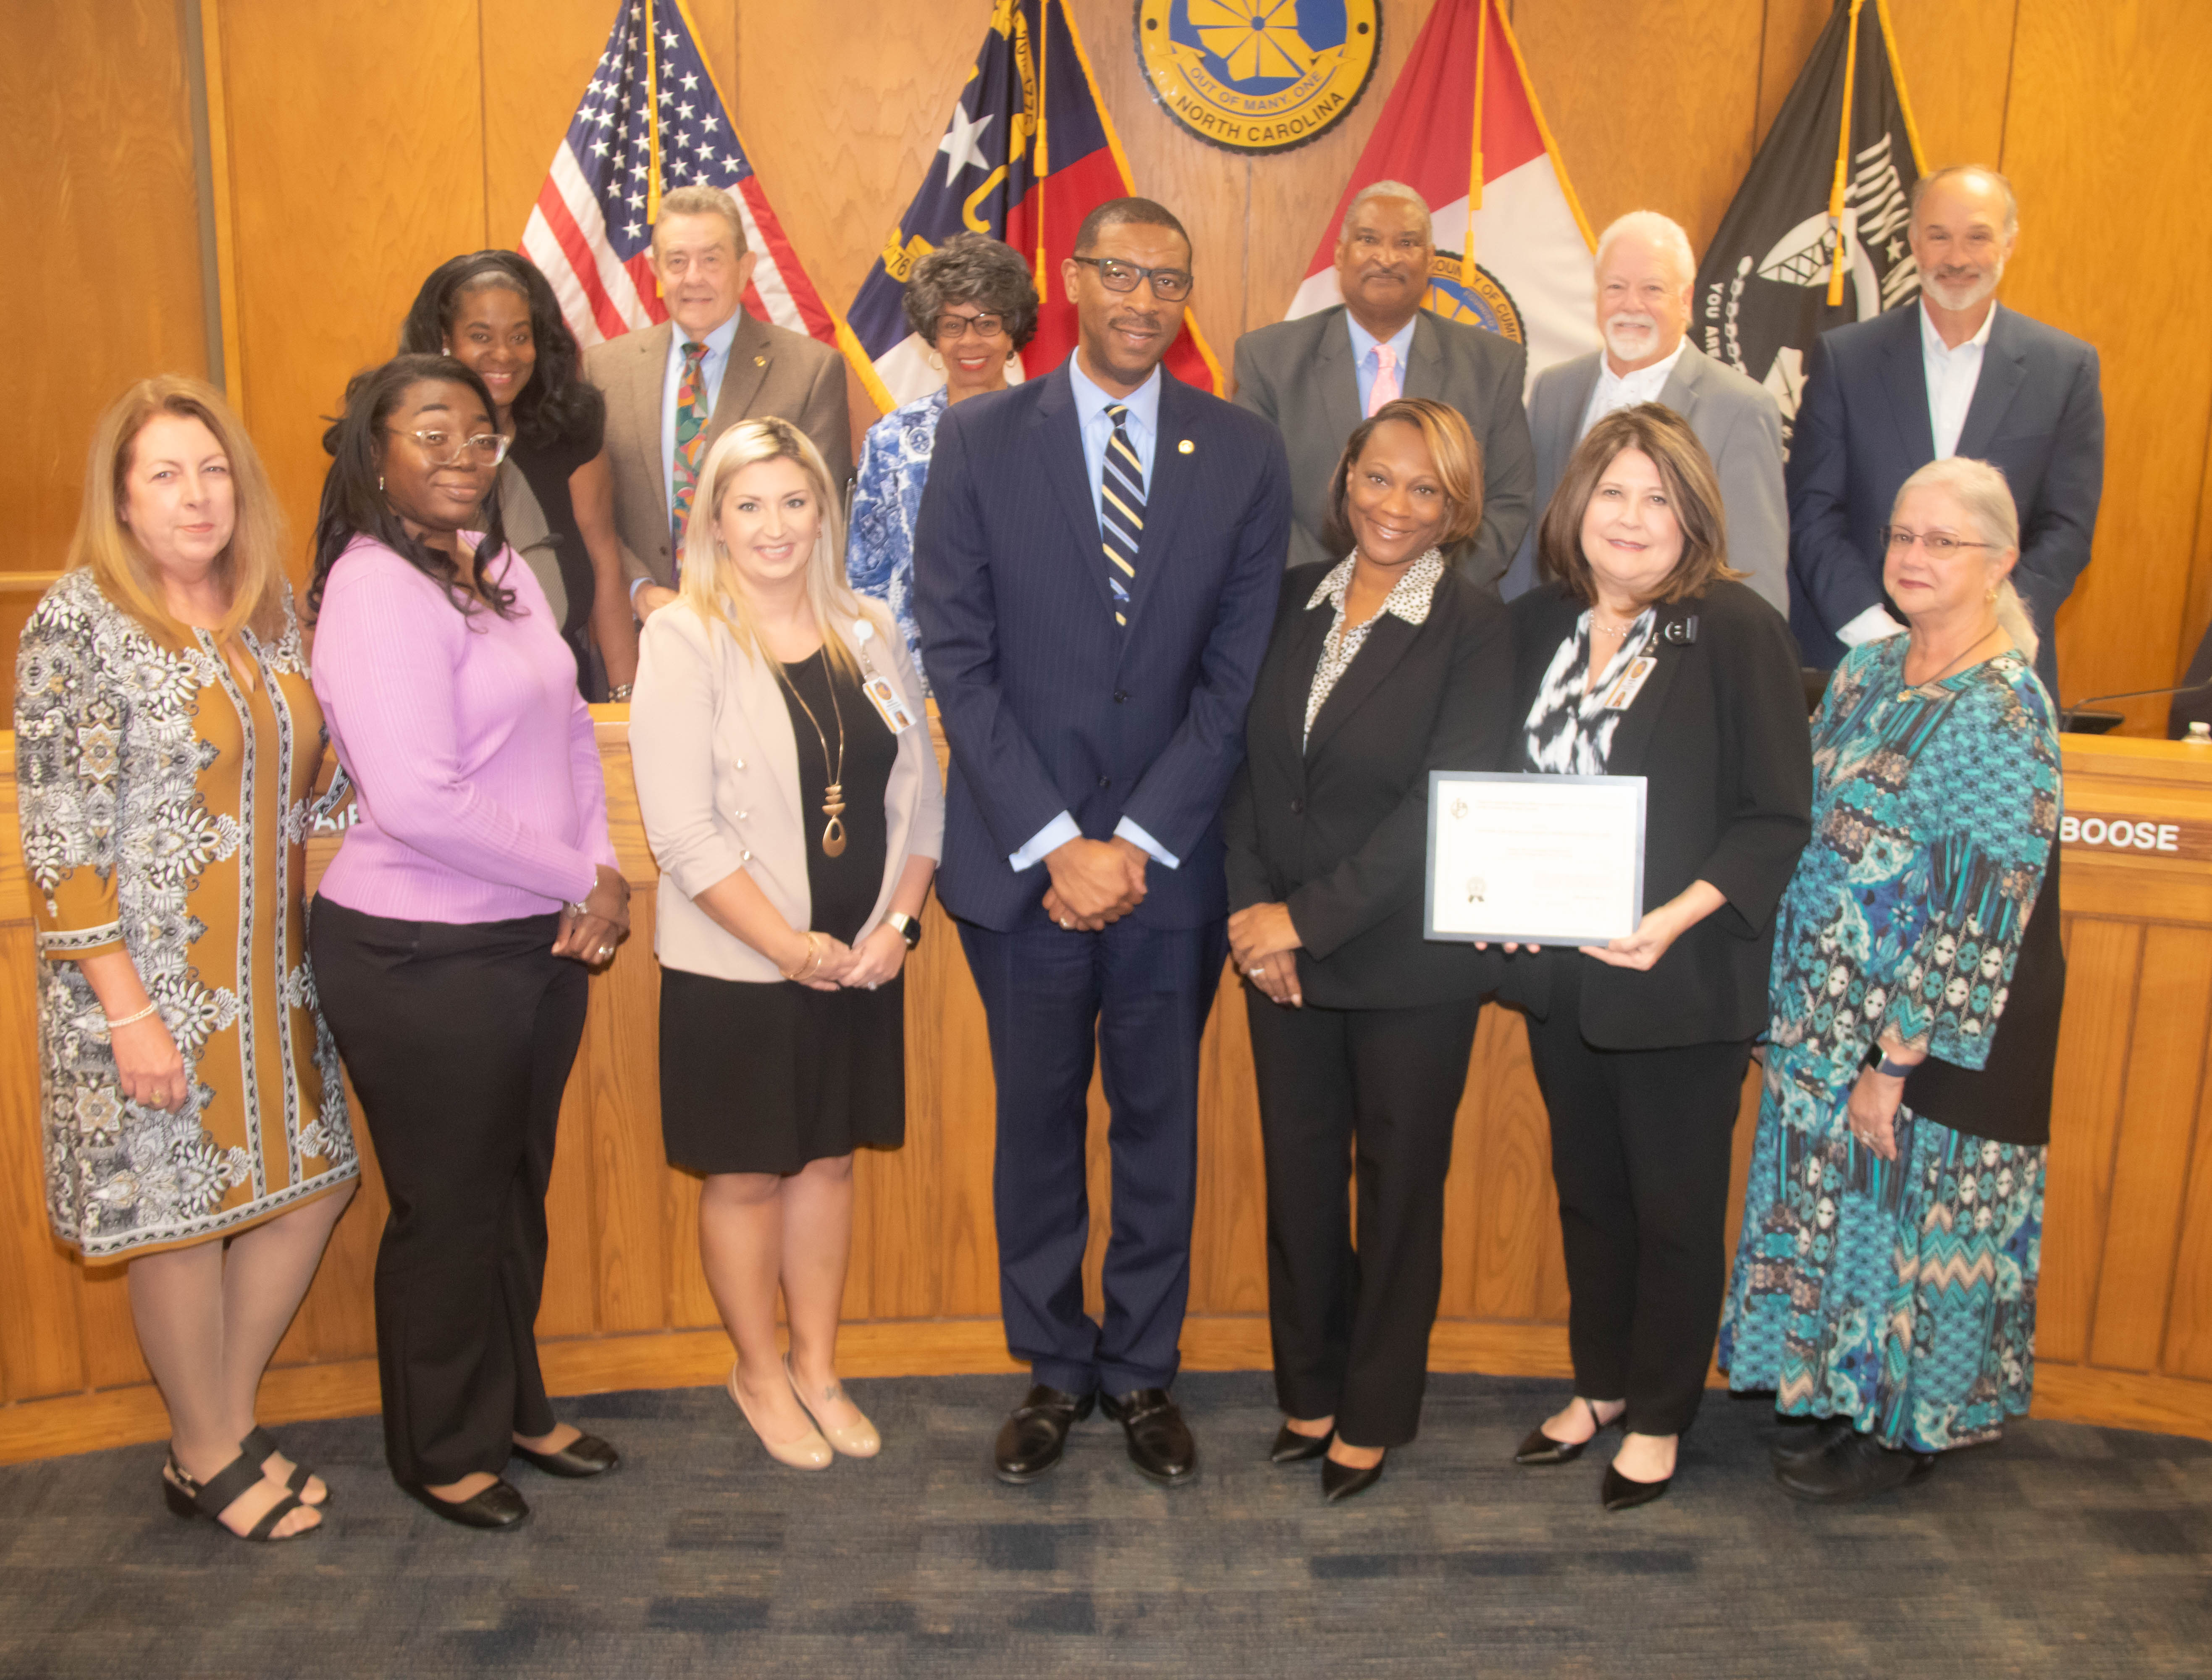 Budget & Performance staff recognized by Board of Commissioners and County Manager